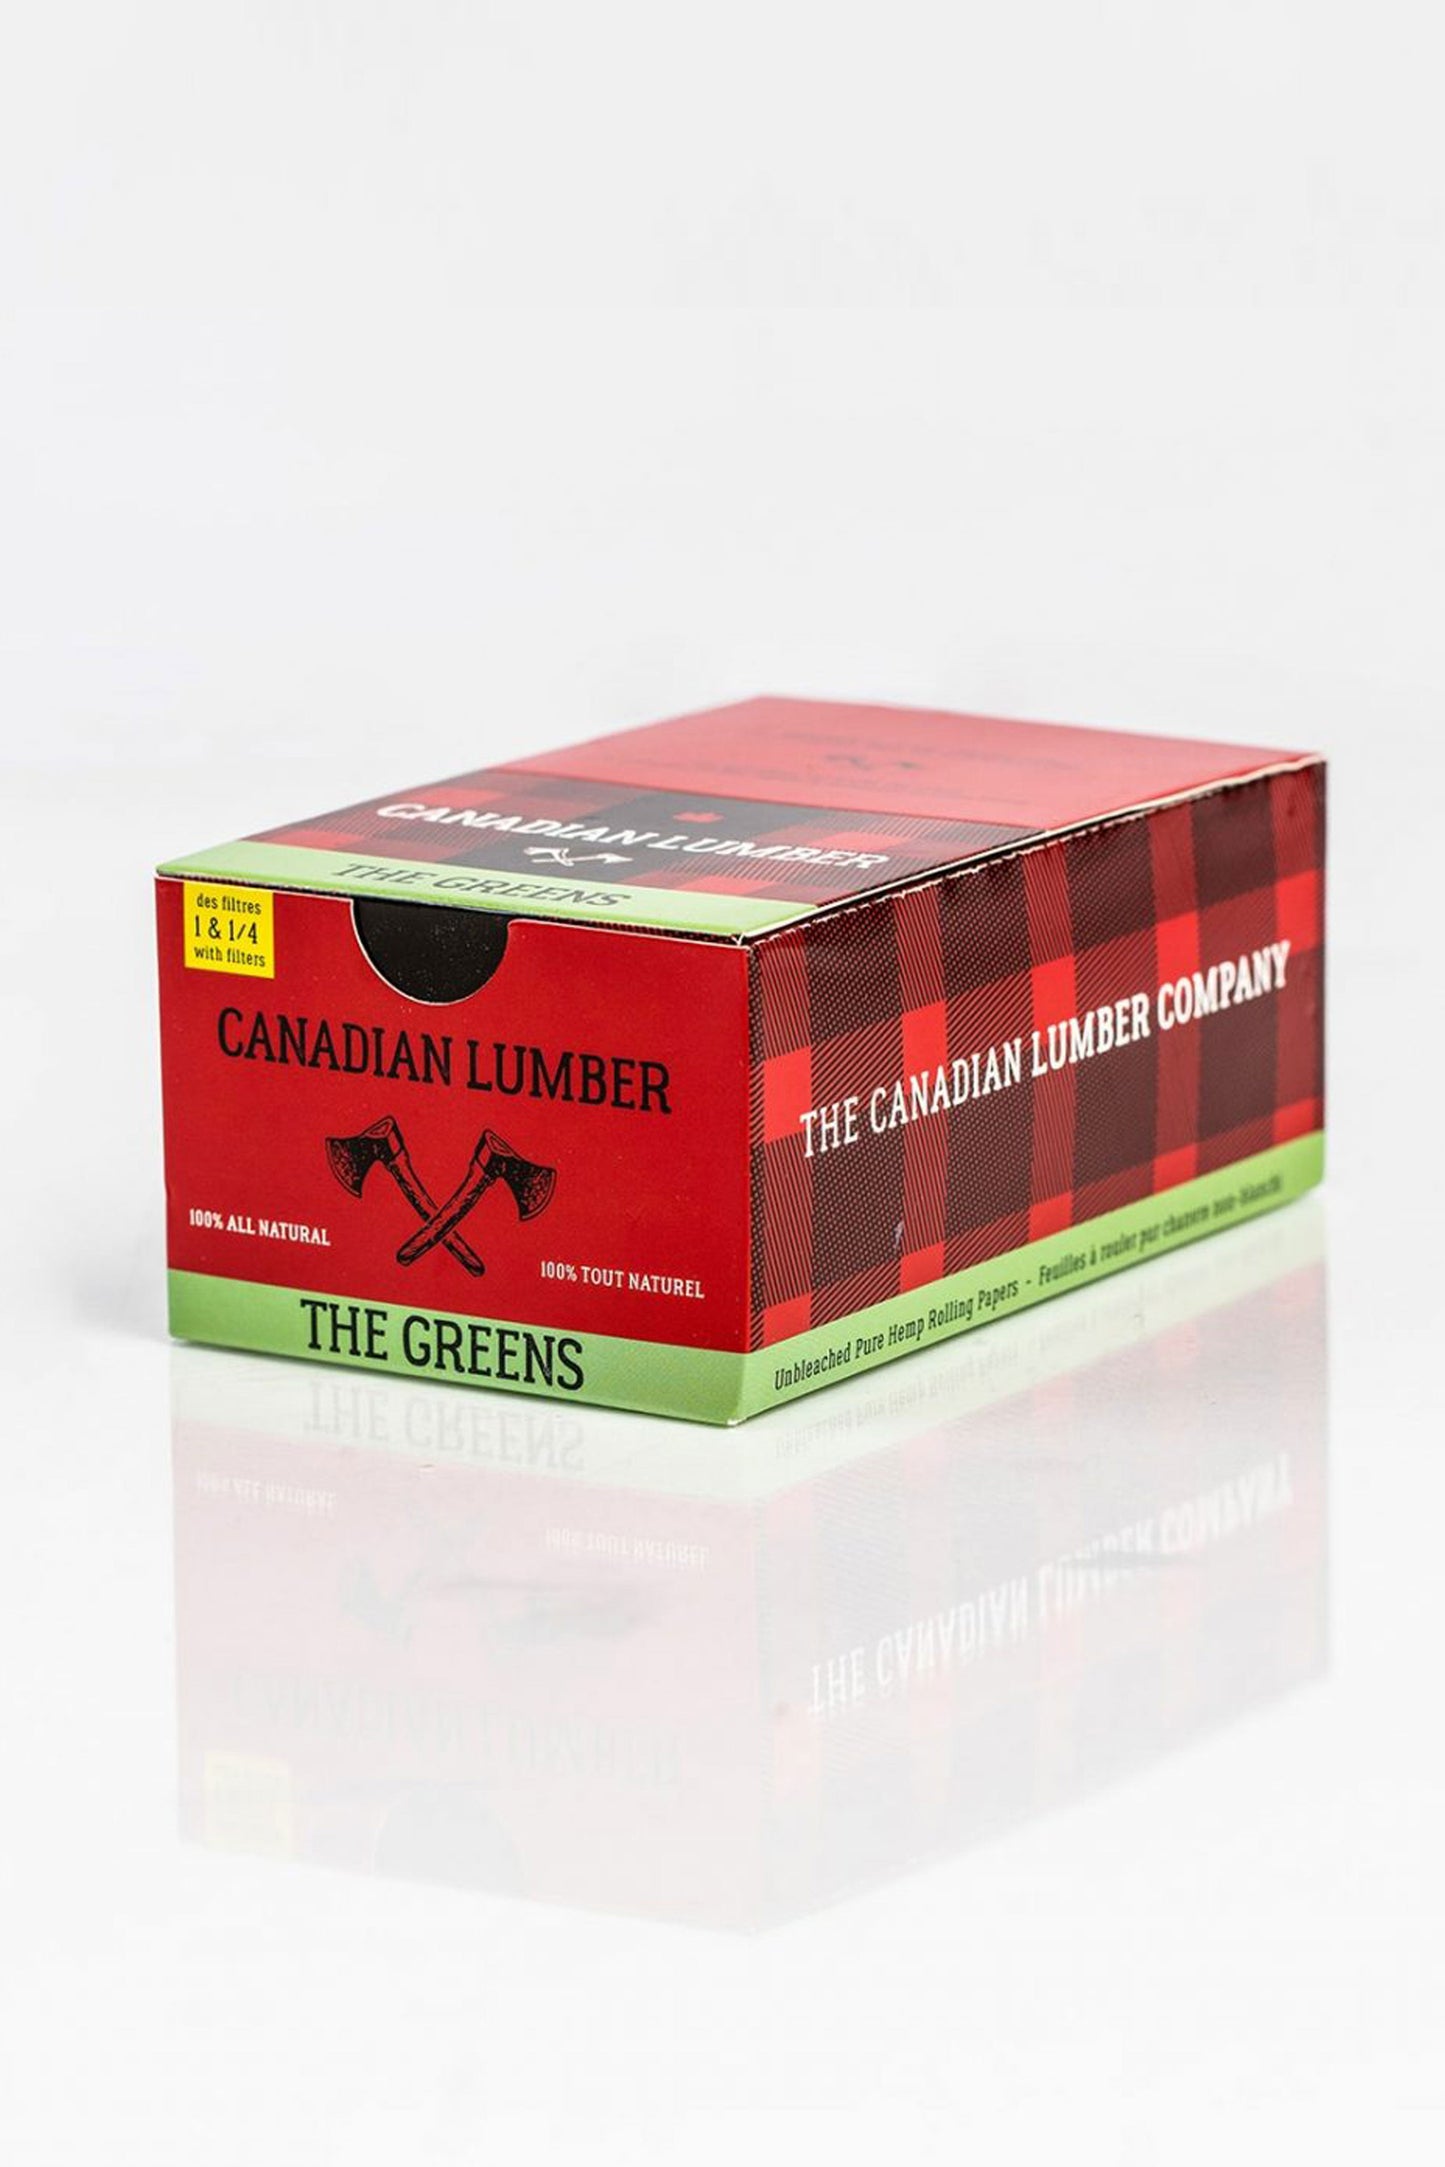 CANADIAN LUMBER THE GREENS 1 1/4 – DISPLAY BOX OF 22_0